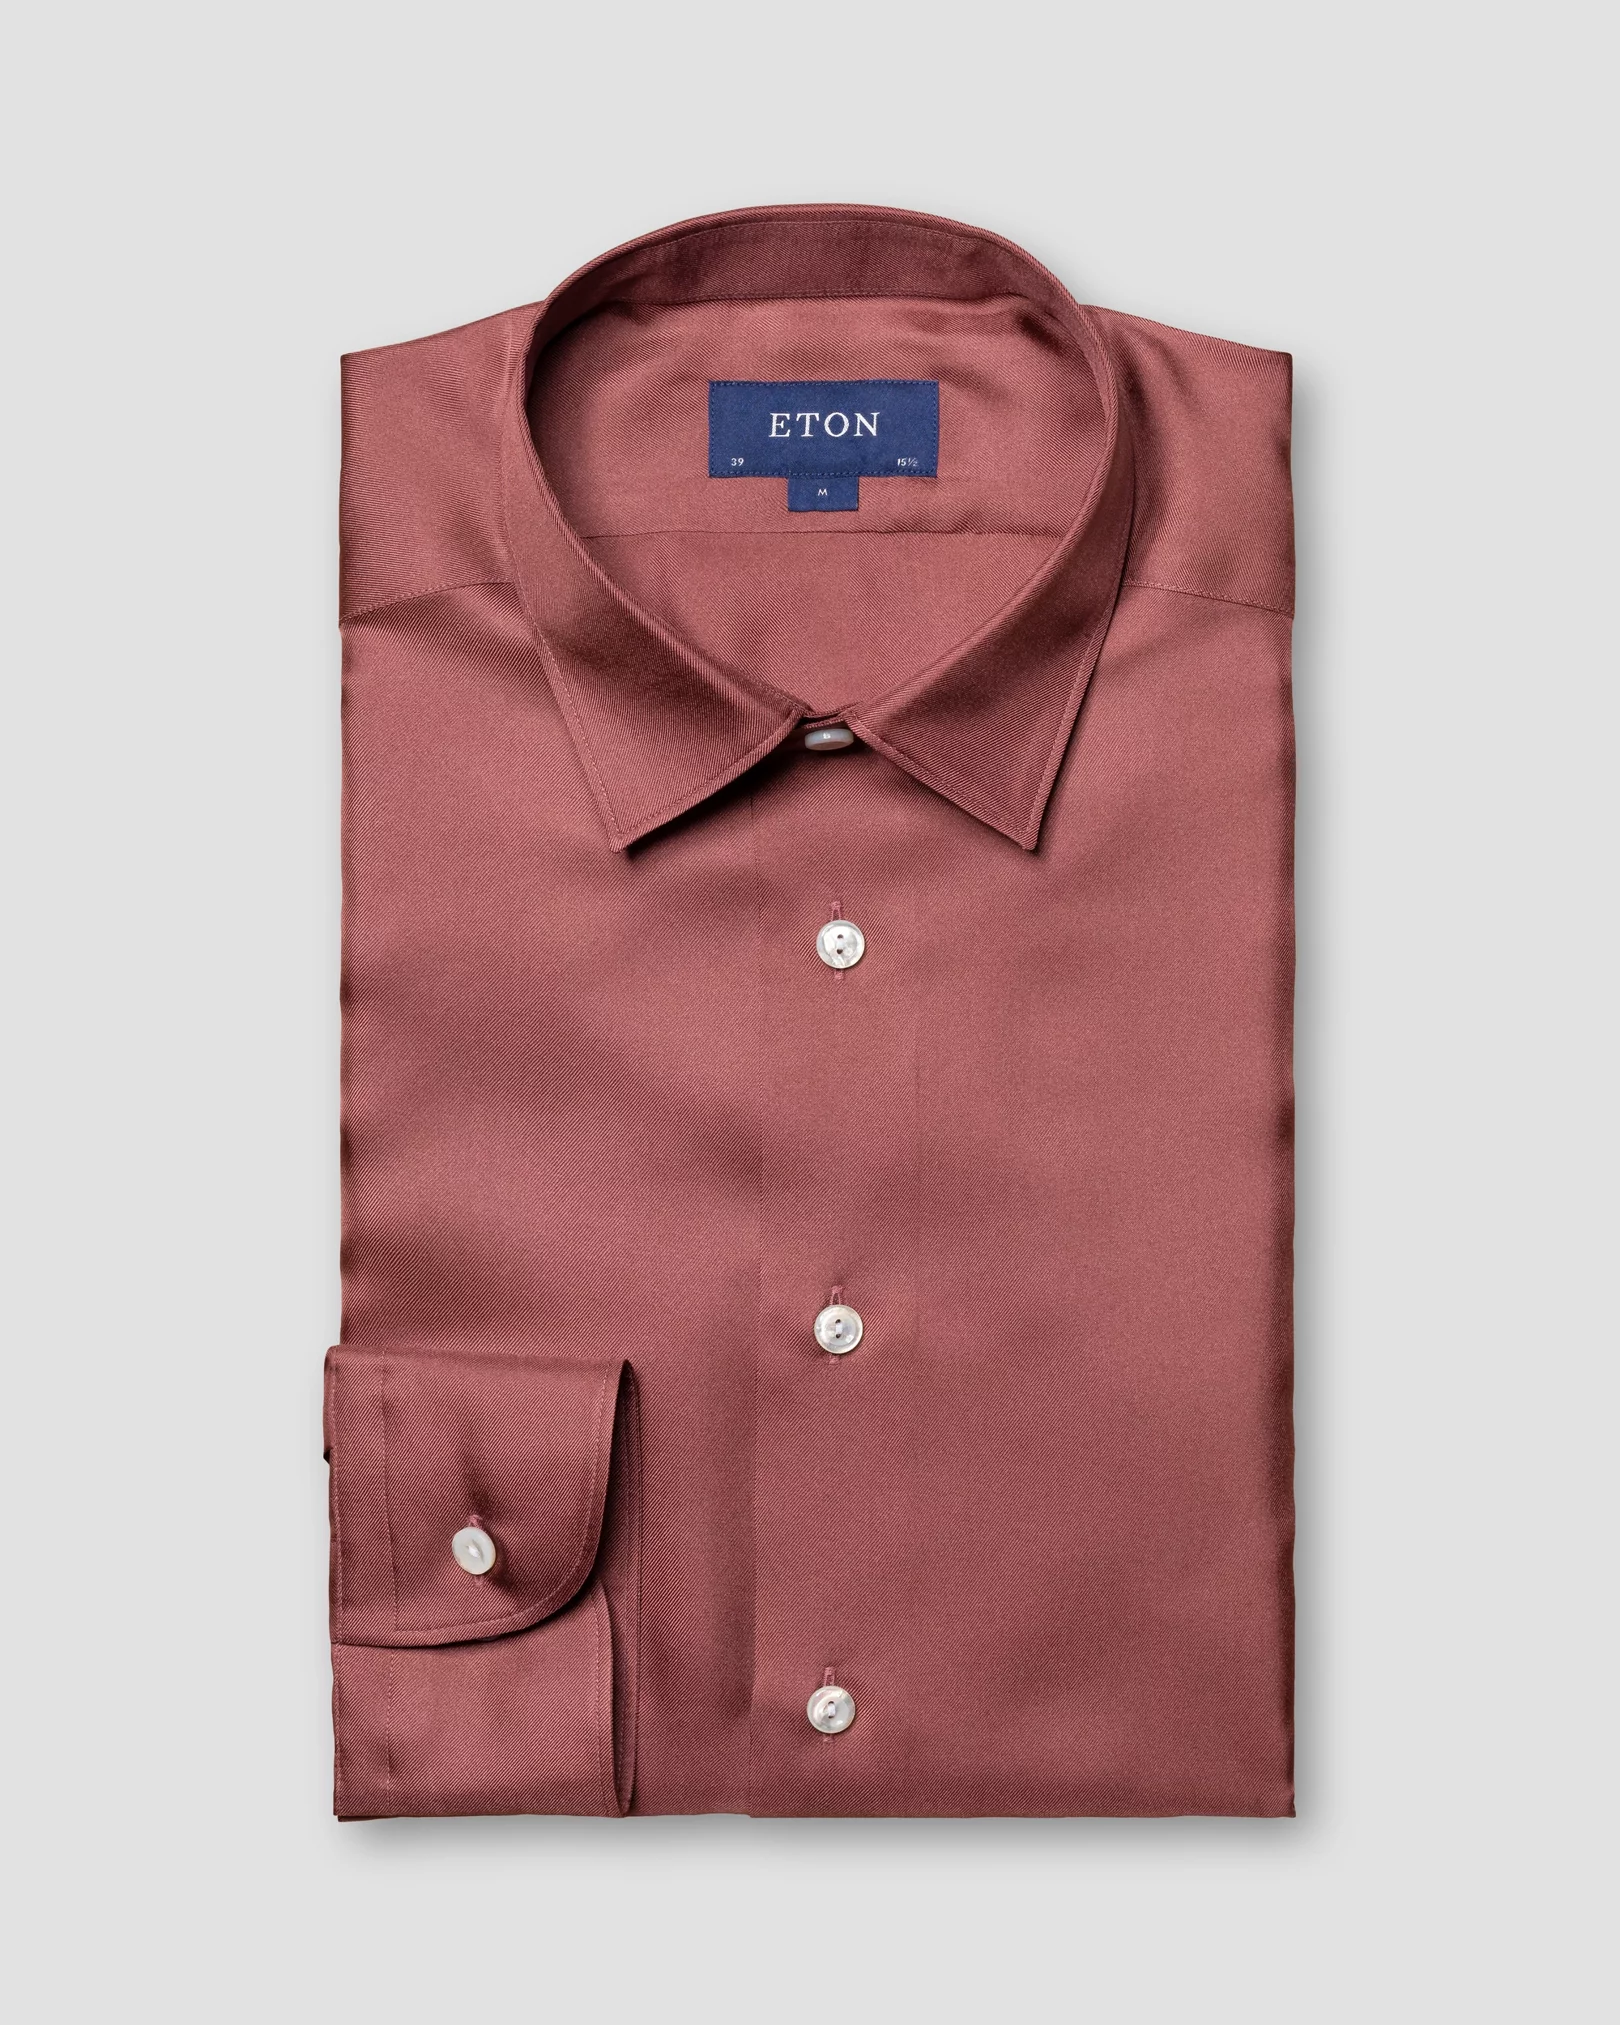 Eton - red silk twill evening shirt pointed single rounded slim soft